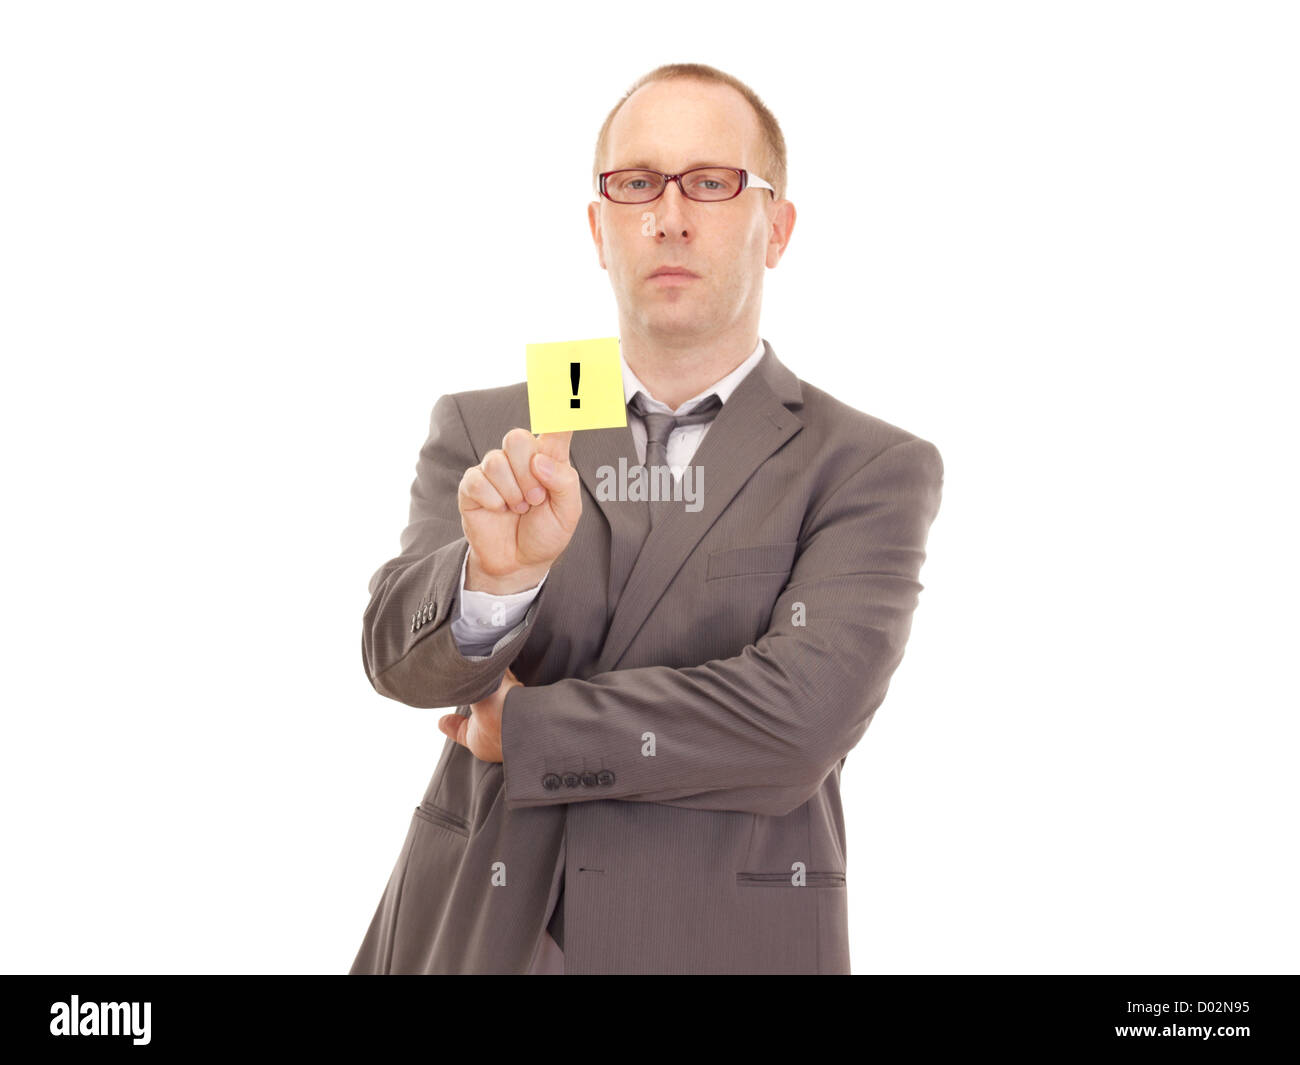 Business person showing removable note Stock Photo